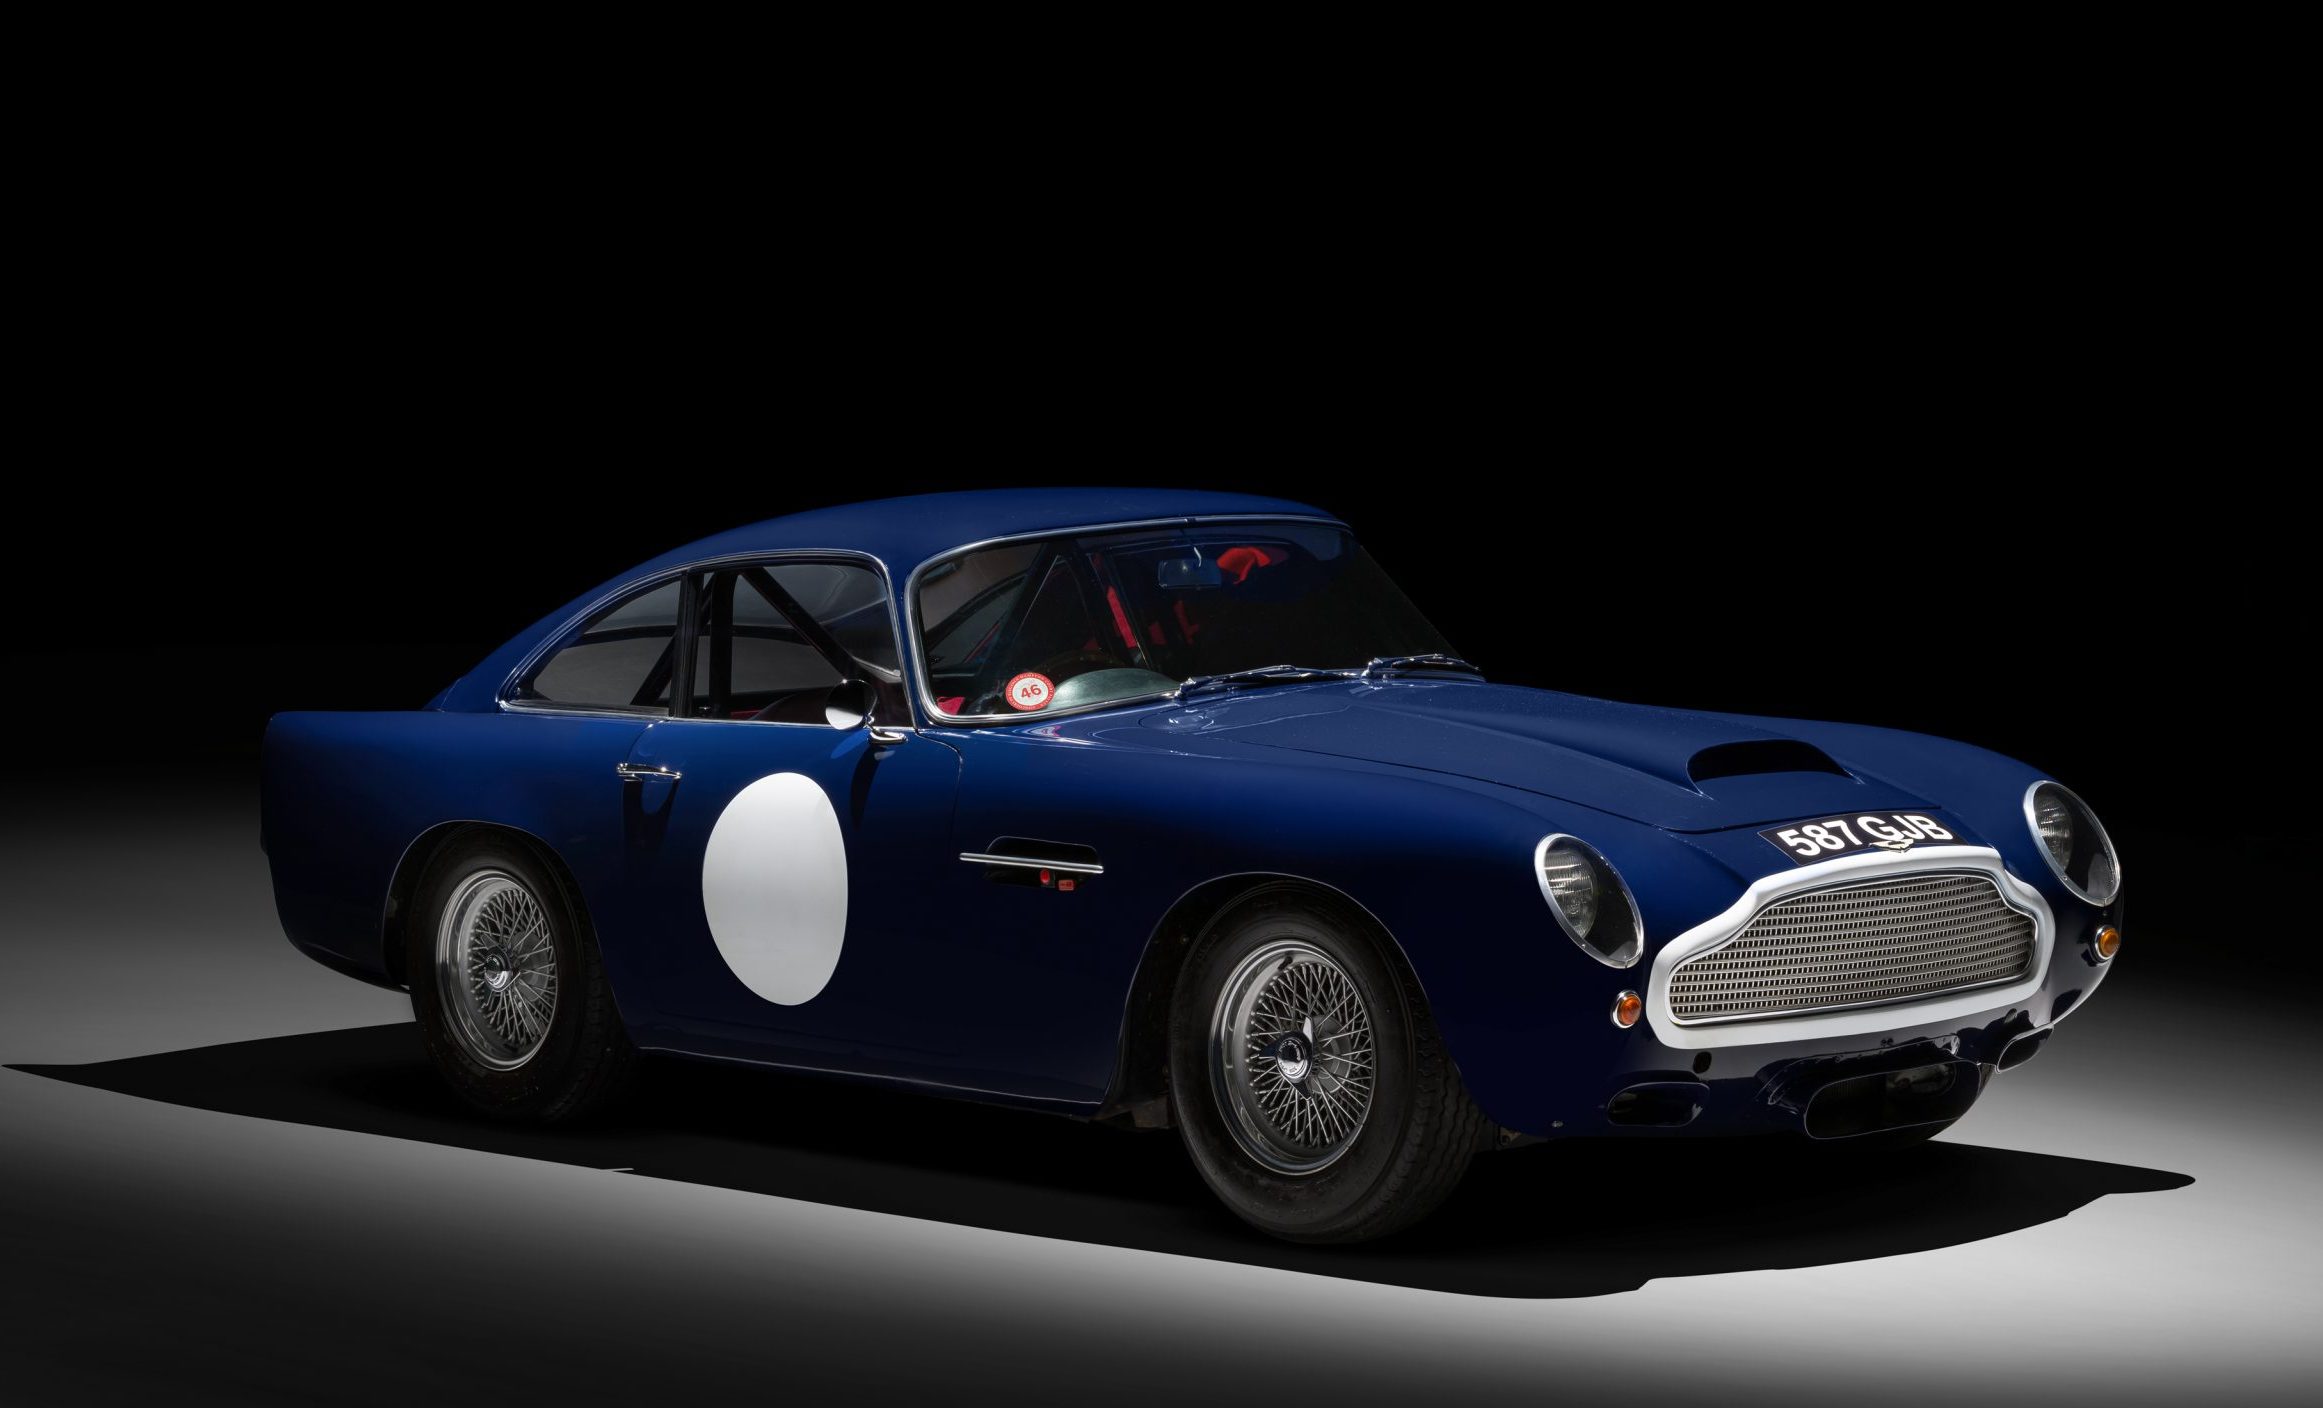 Racing royalty: ex-Stirling Moss Aston Martin DB4 GT Lightweight comes to market for the first time in two decades